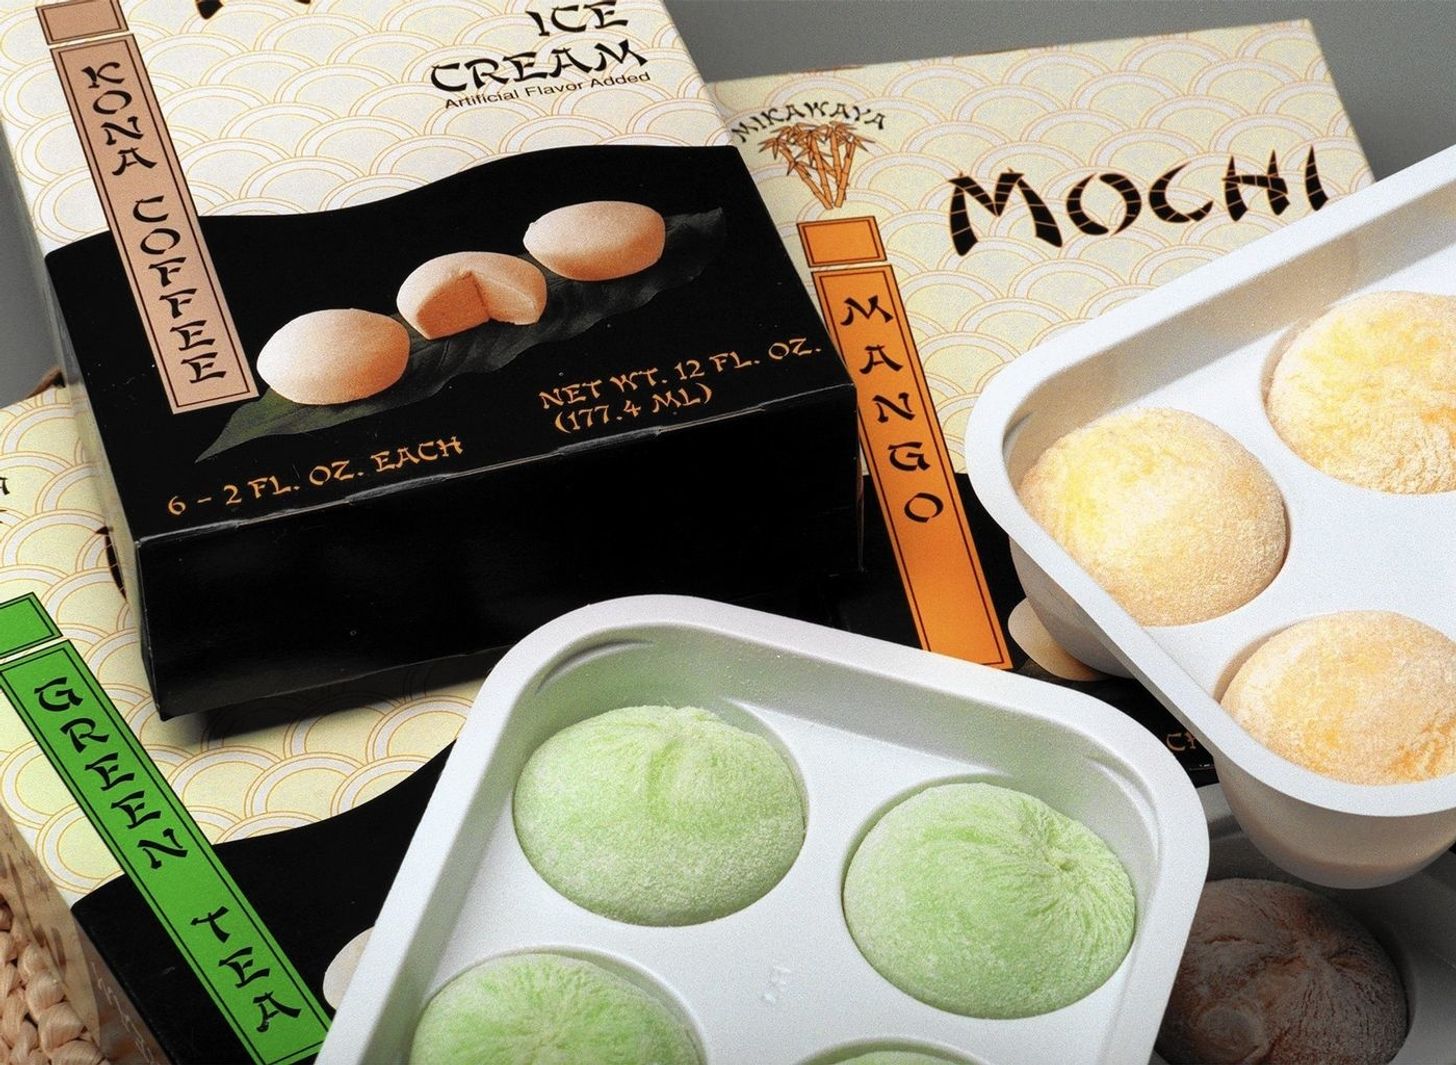 Asian-influenced mochi ice cream set to hit retail stores